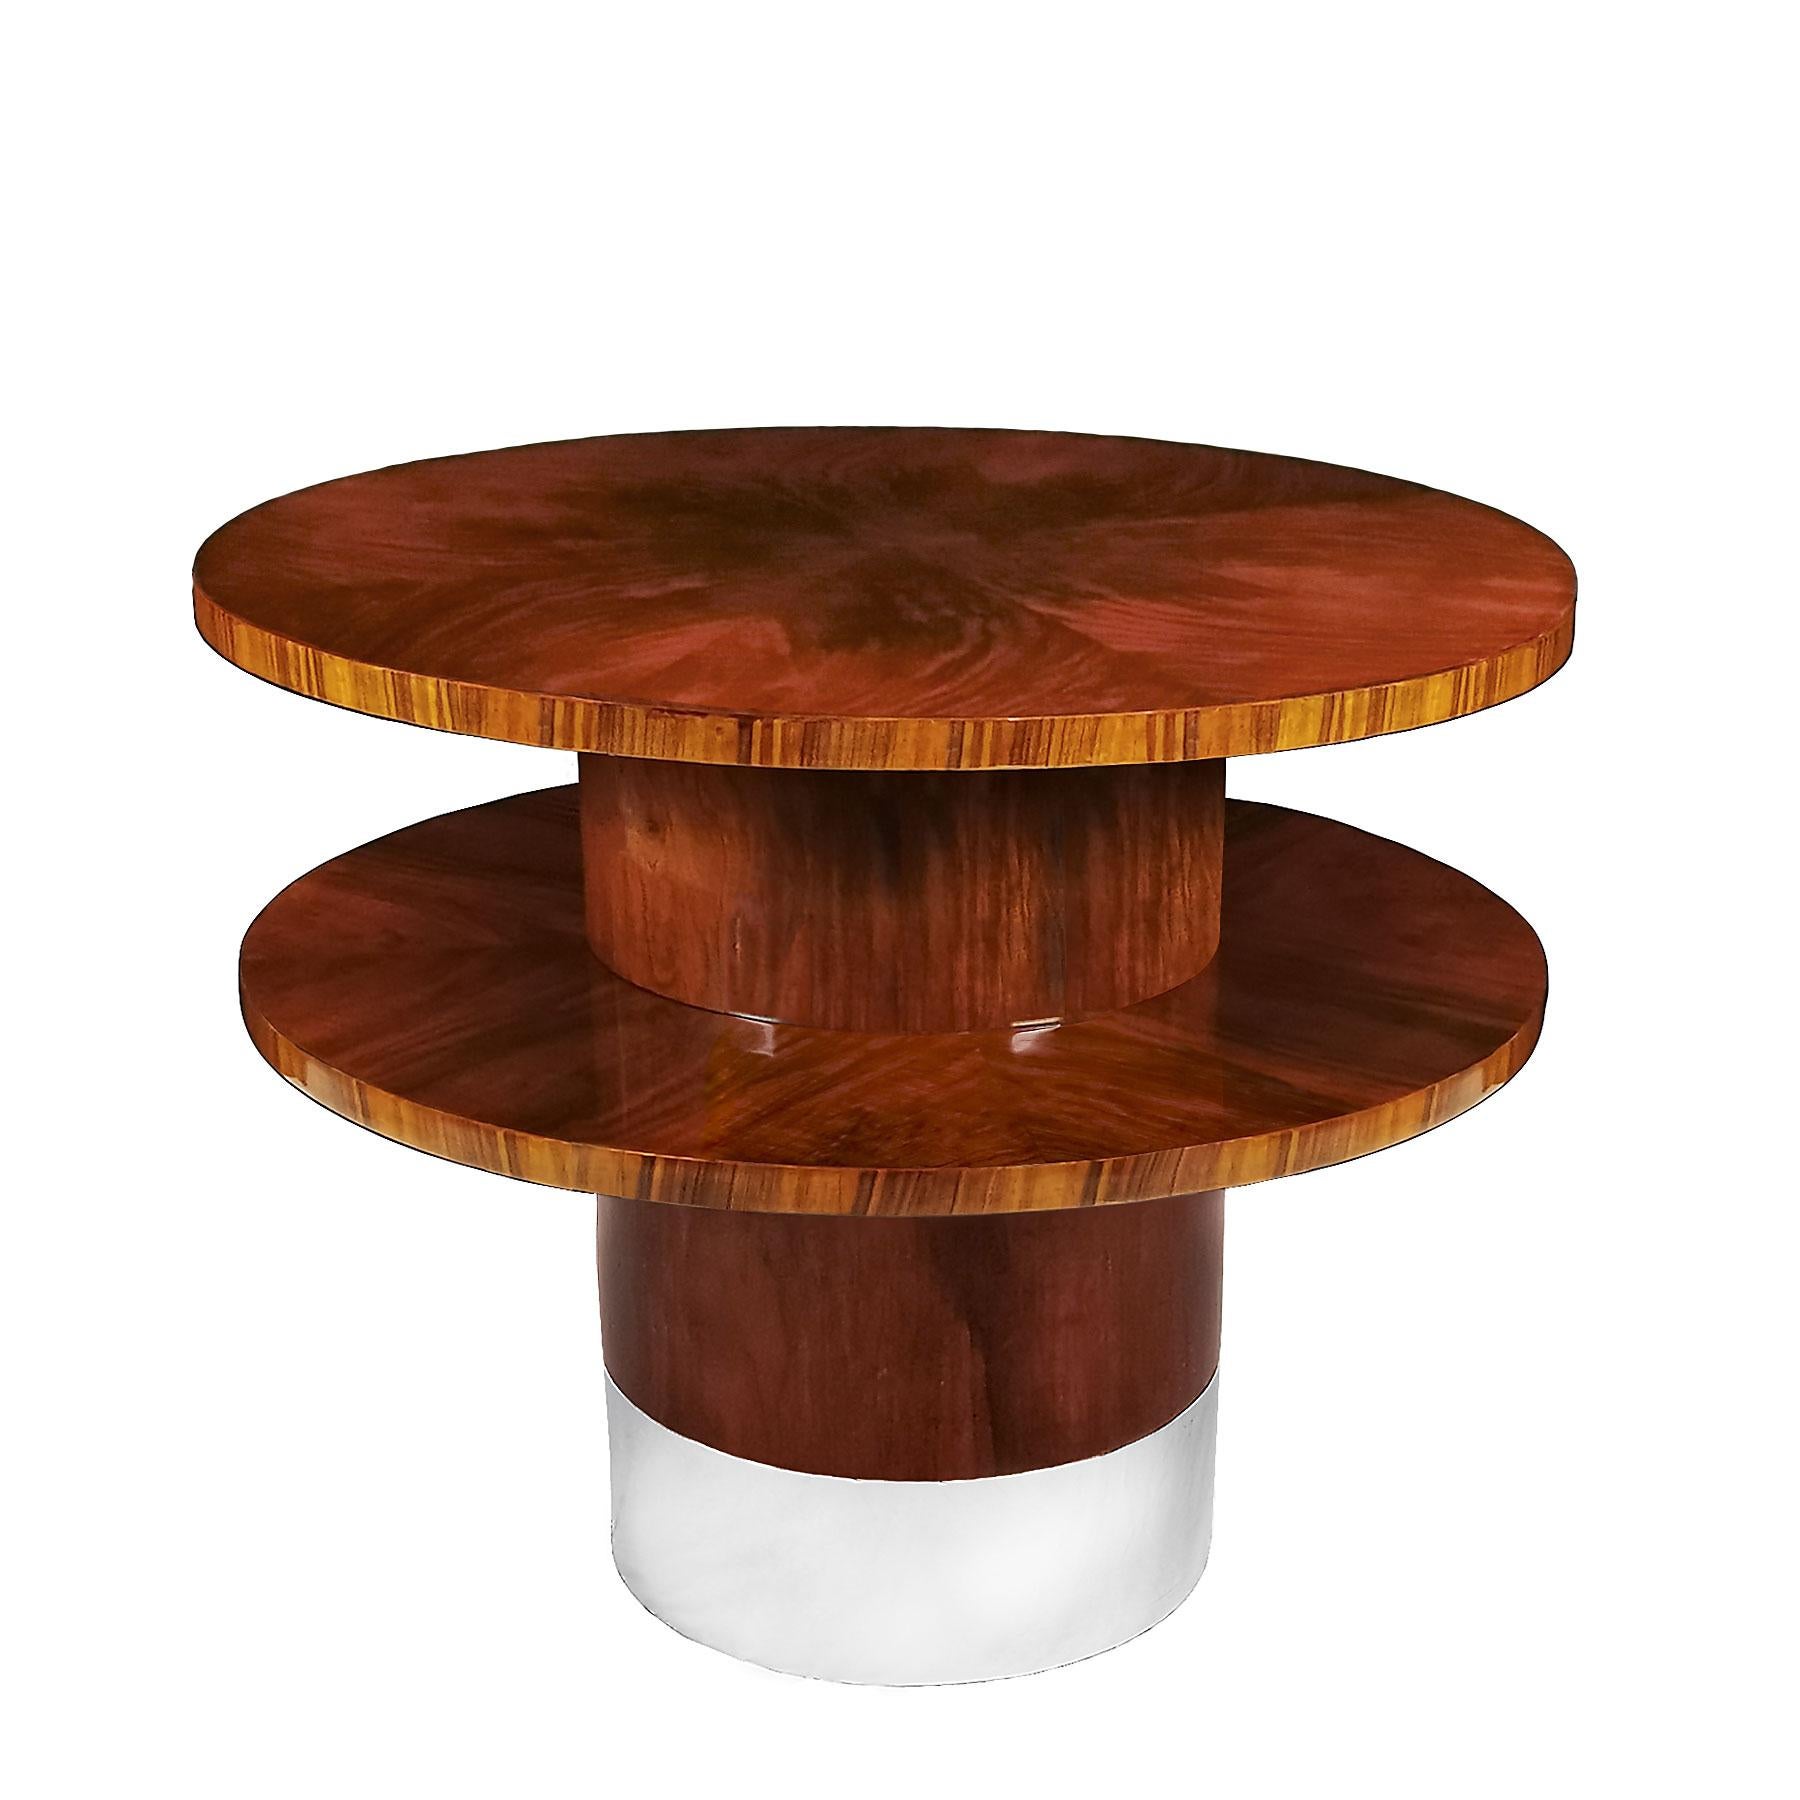 Large Art Deco center table with two levels, French polished walnut veneer. Base decorated with a polished aluminum circle. Can be dismantled.

Italy, circa 1930.